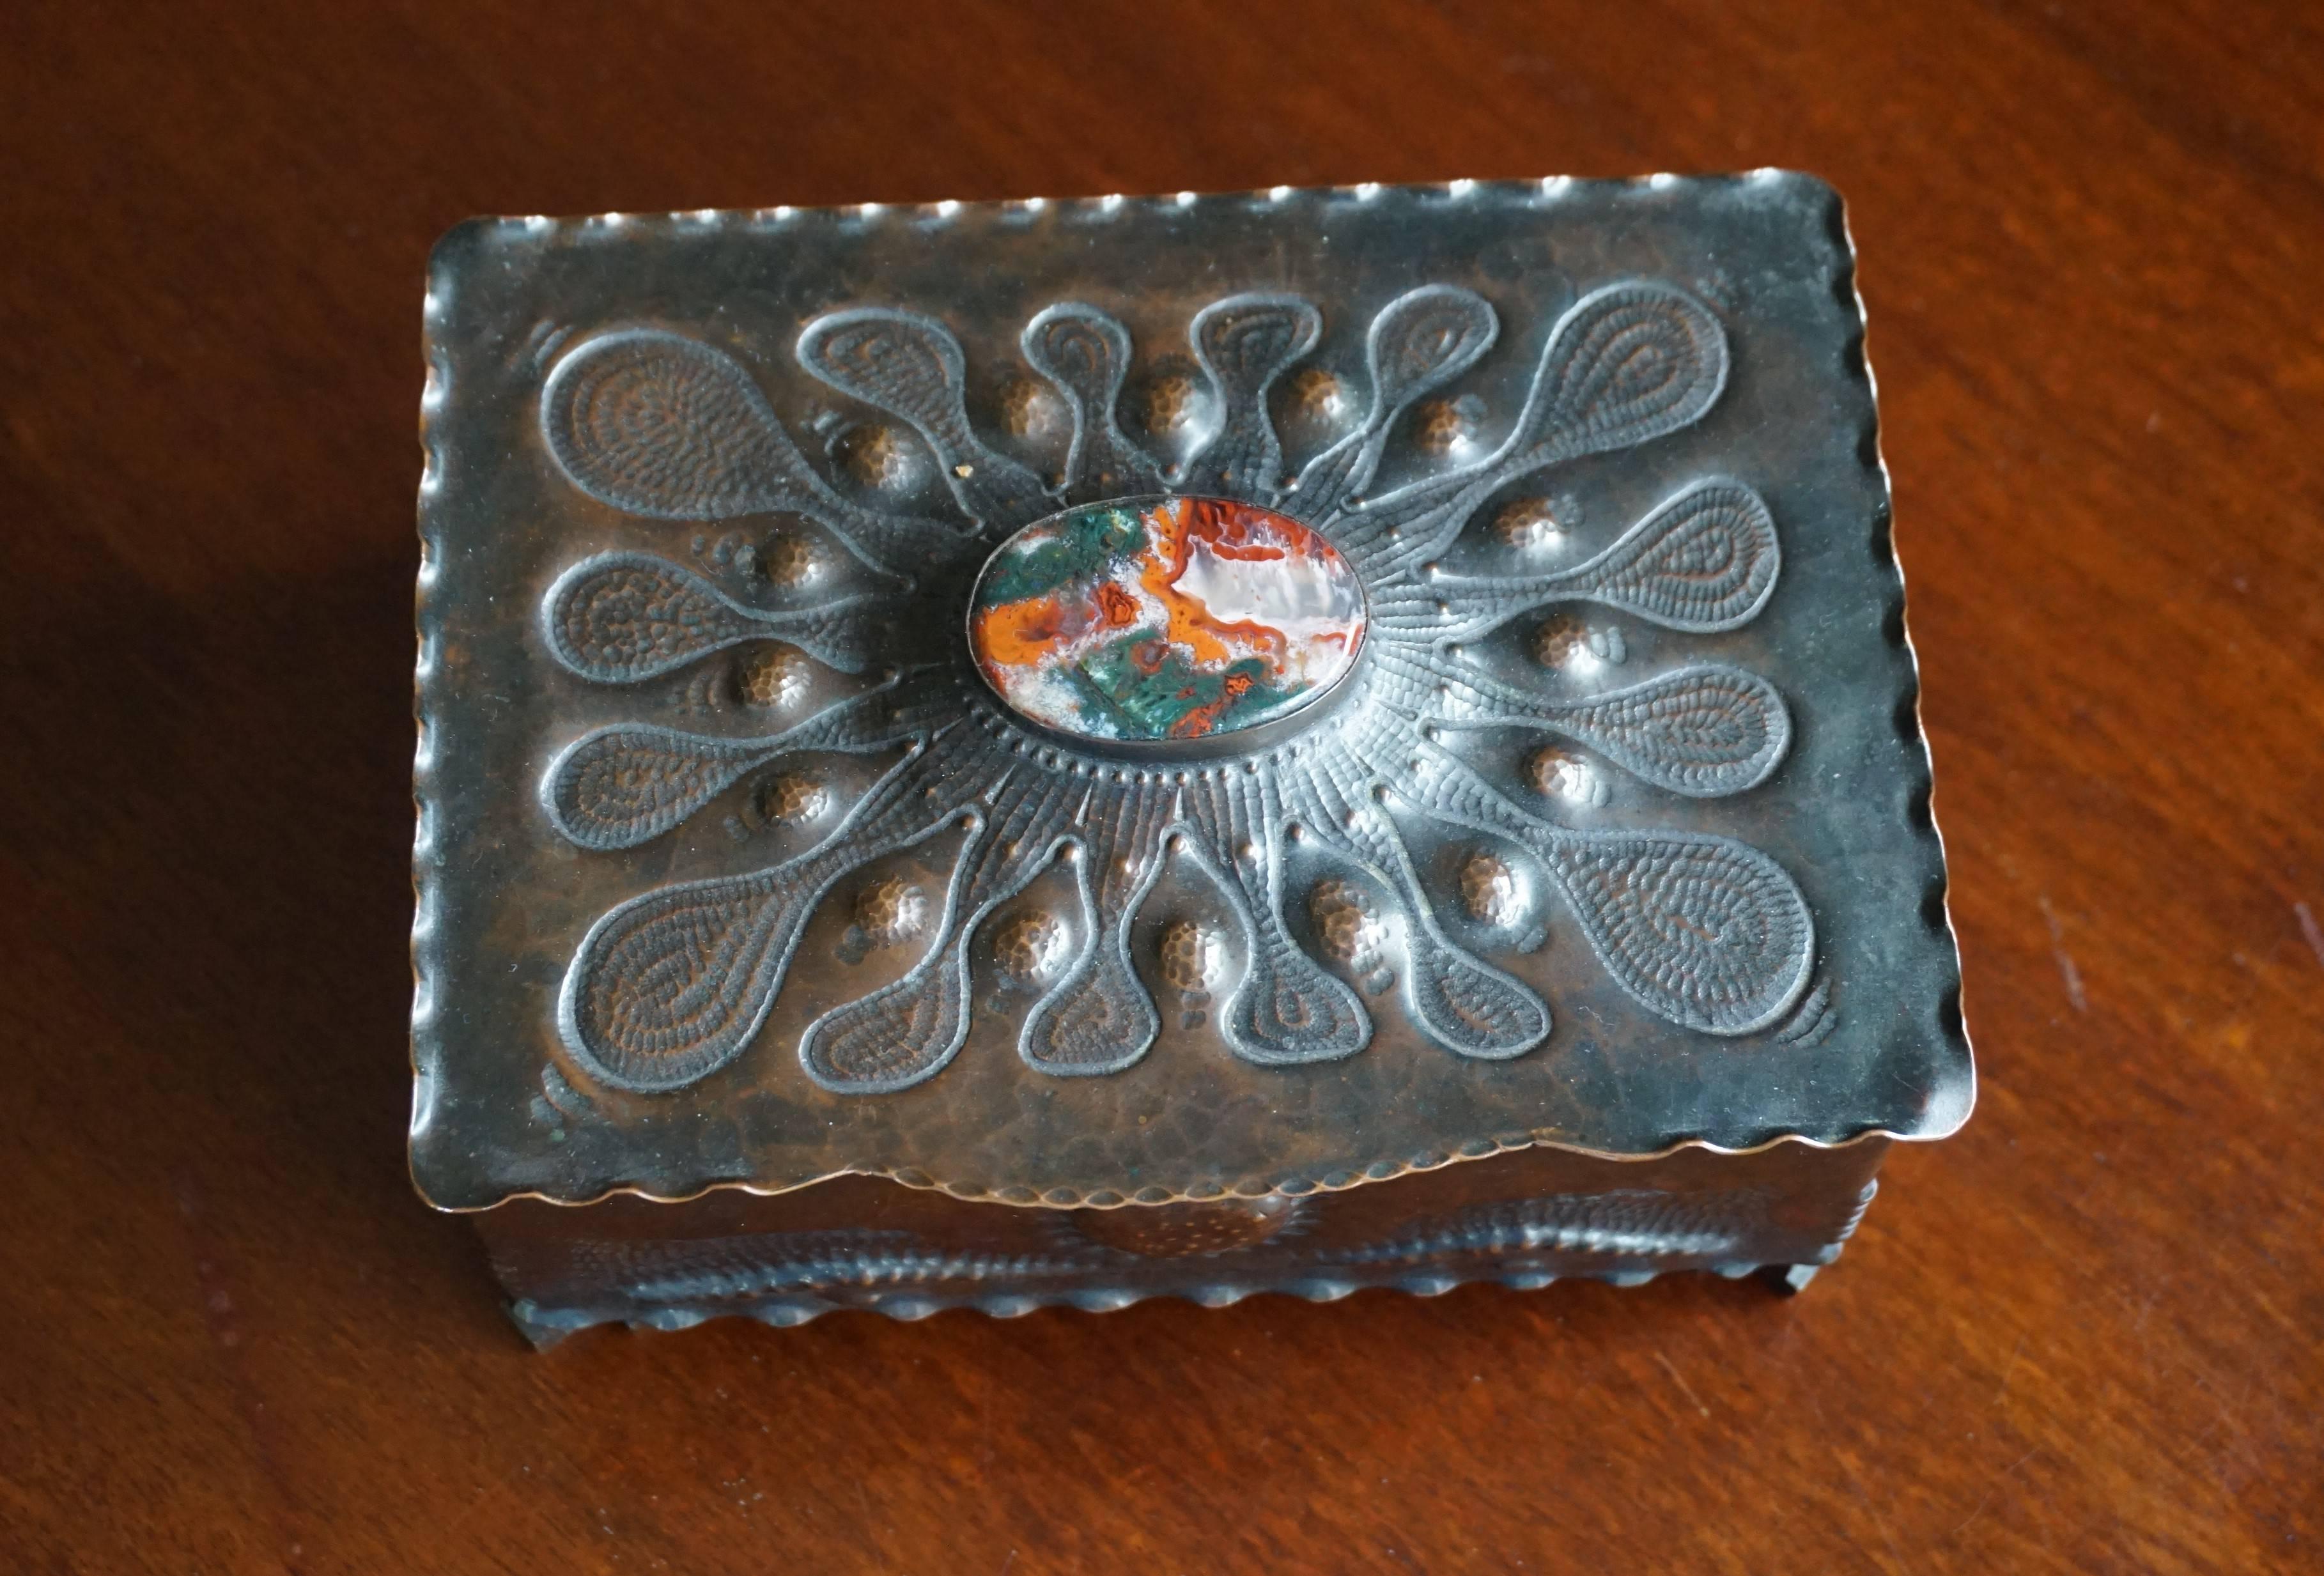 Dutch Museum Quality Hand-Hammered Copper and Gemstone Inlaid Arts & Crafts Box